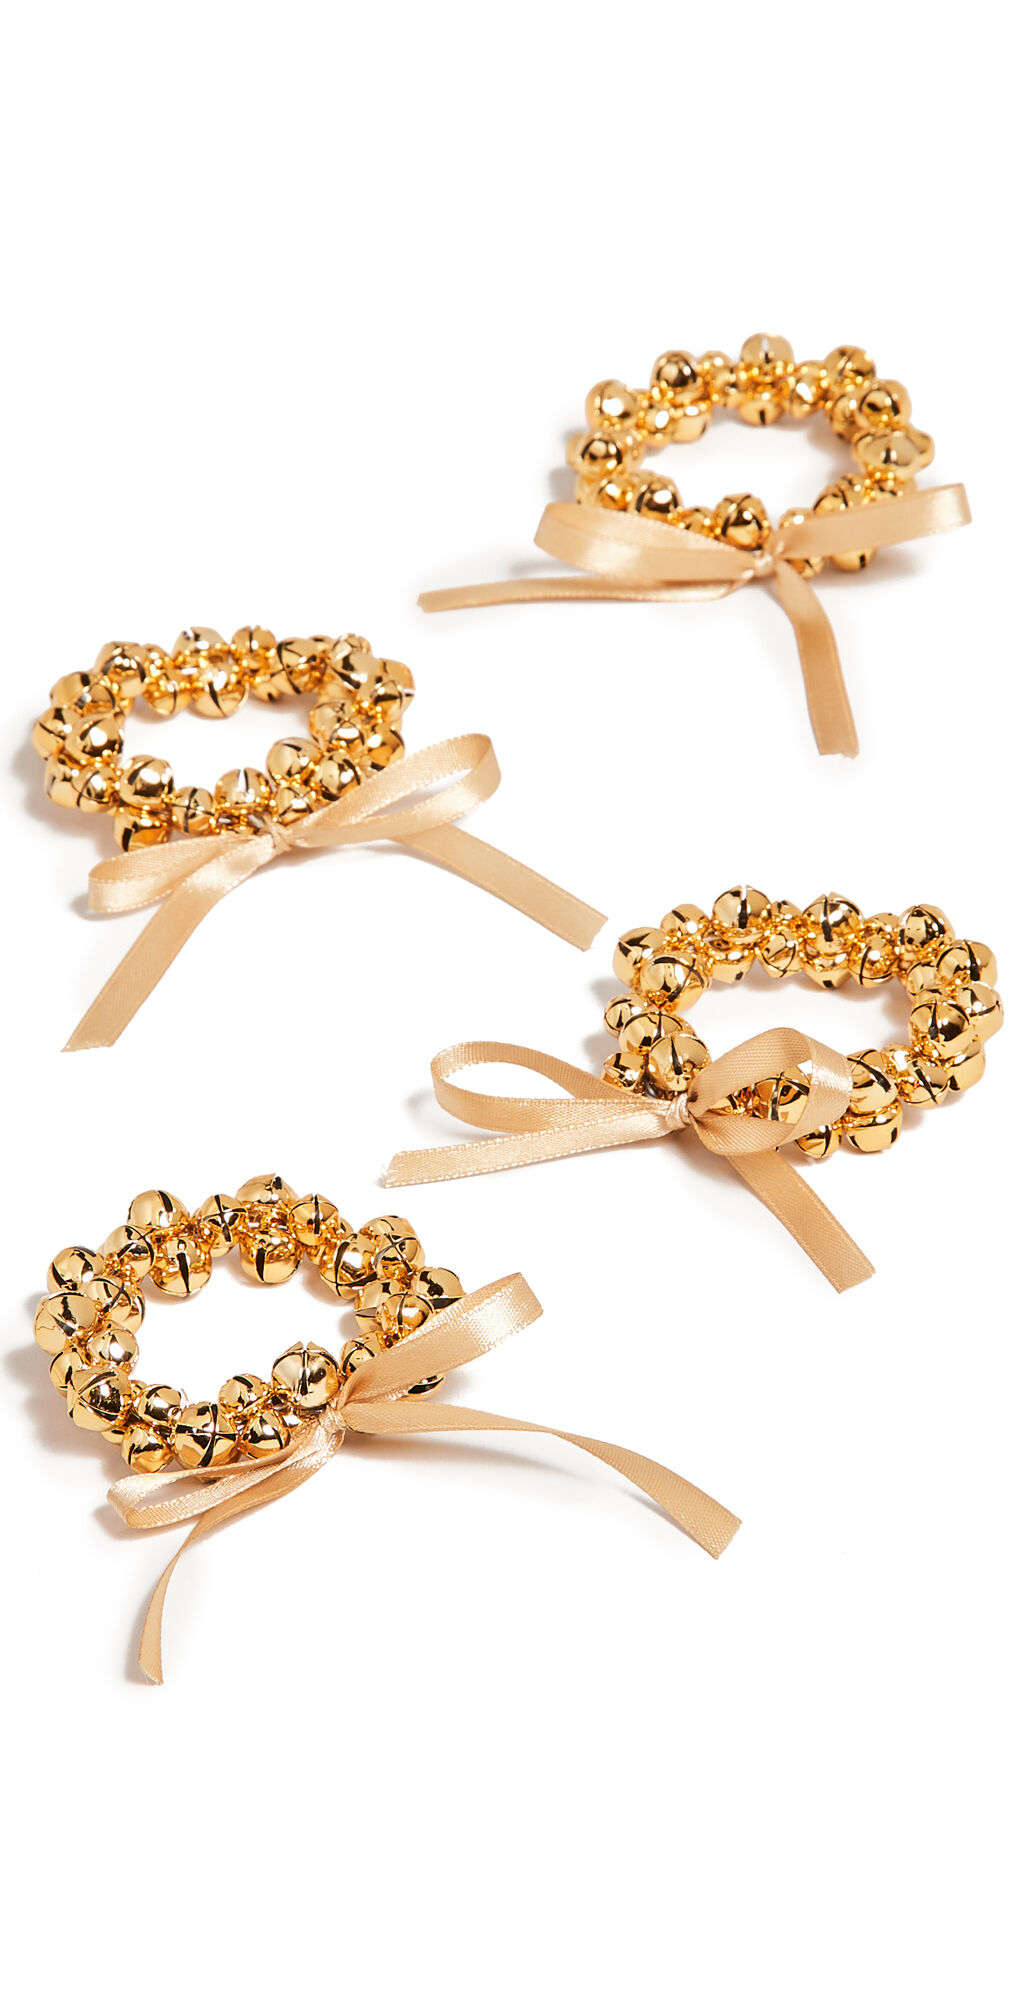 Gift Boutique Set of 4 Jingle Bells Napkin Rings Gold One Size    size: